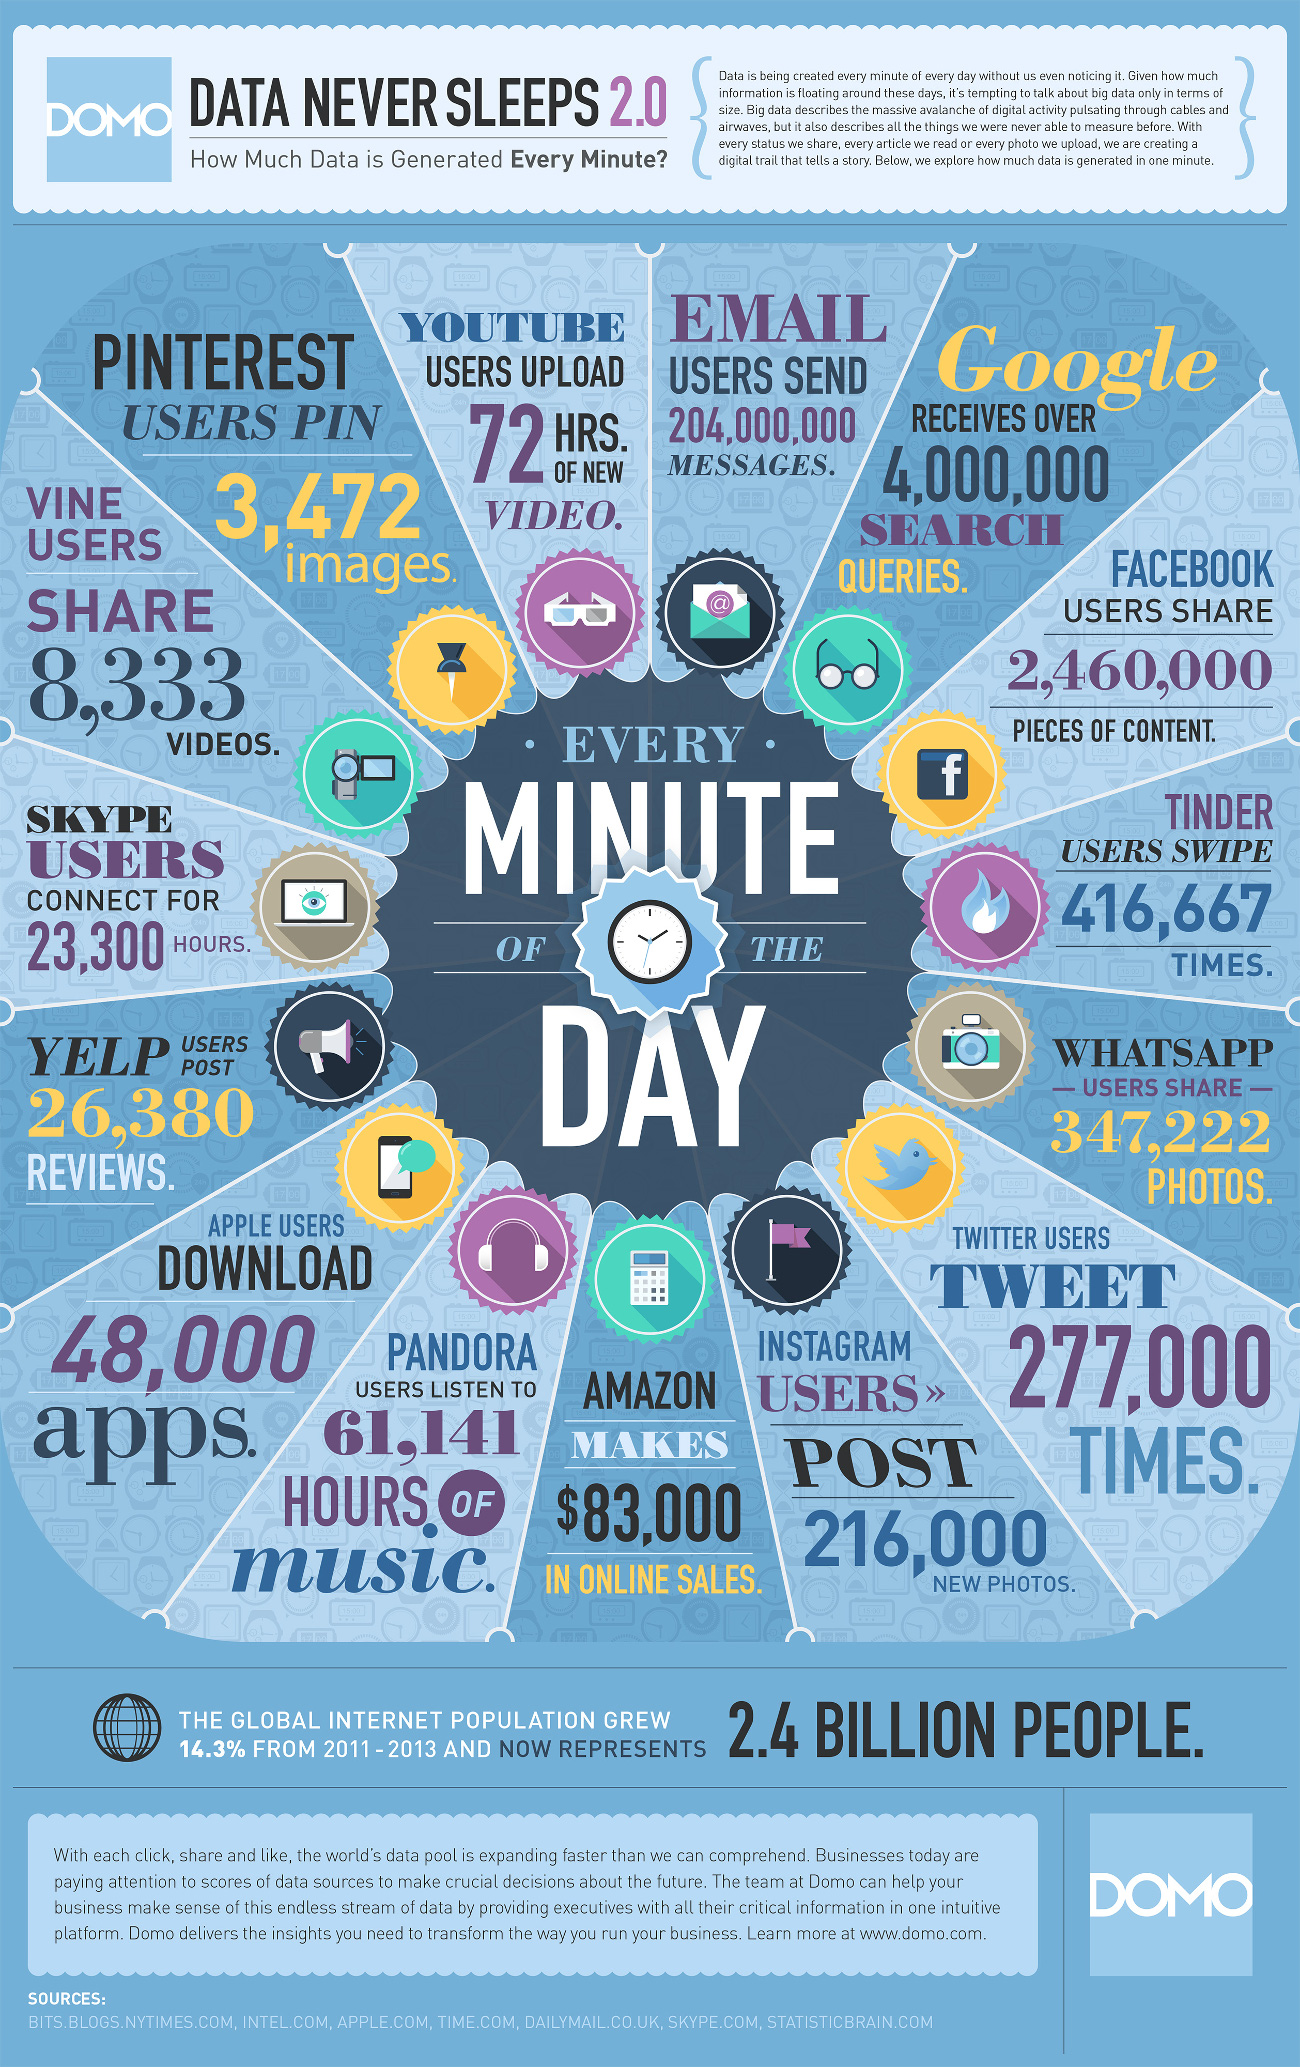 what is happening every minute on the web